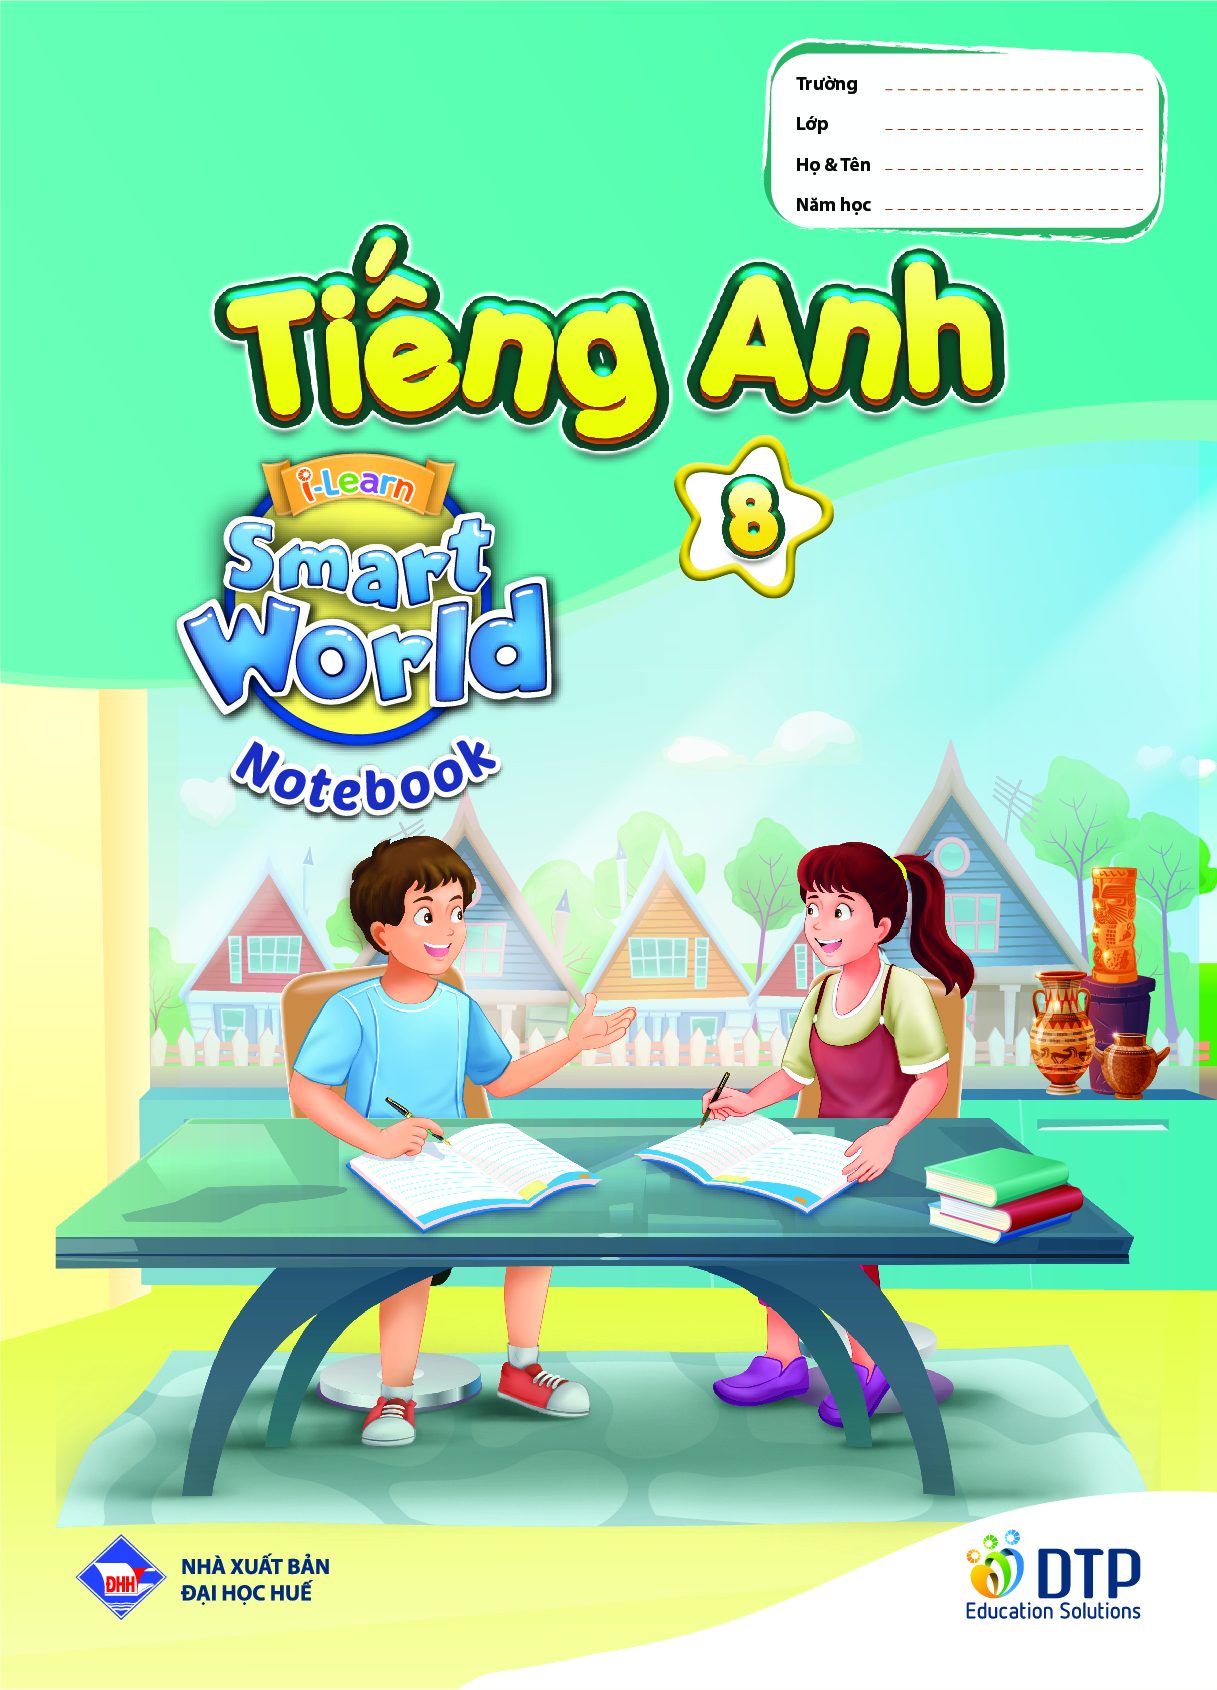 Sách - Dtpbooks -  Tiếng Anh 8 i-Learn Smart World - Notebook